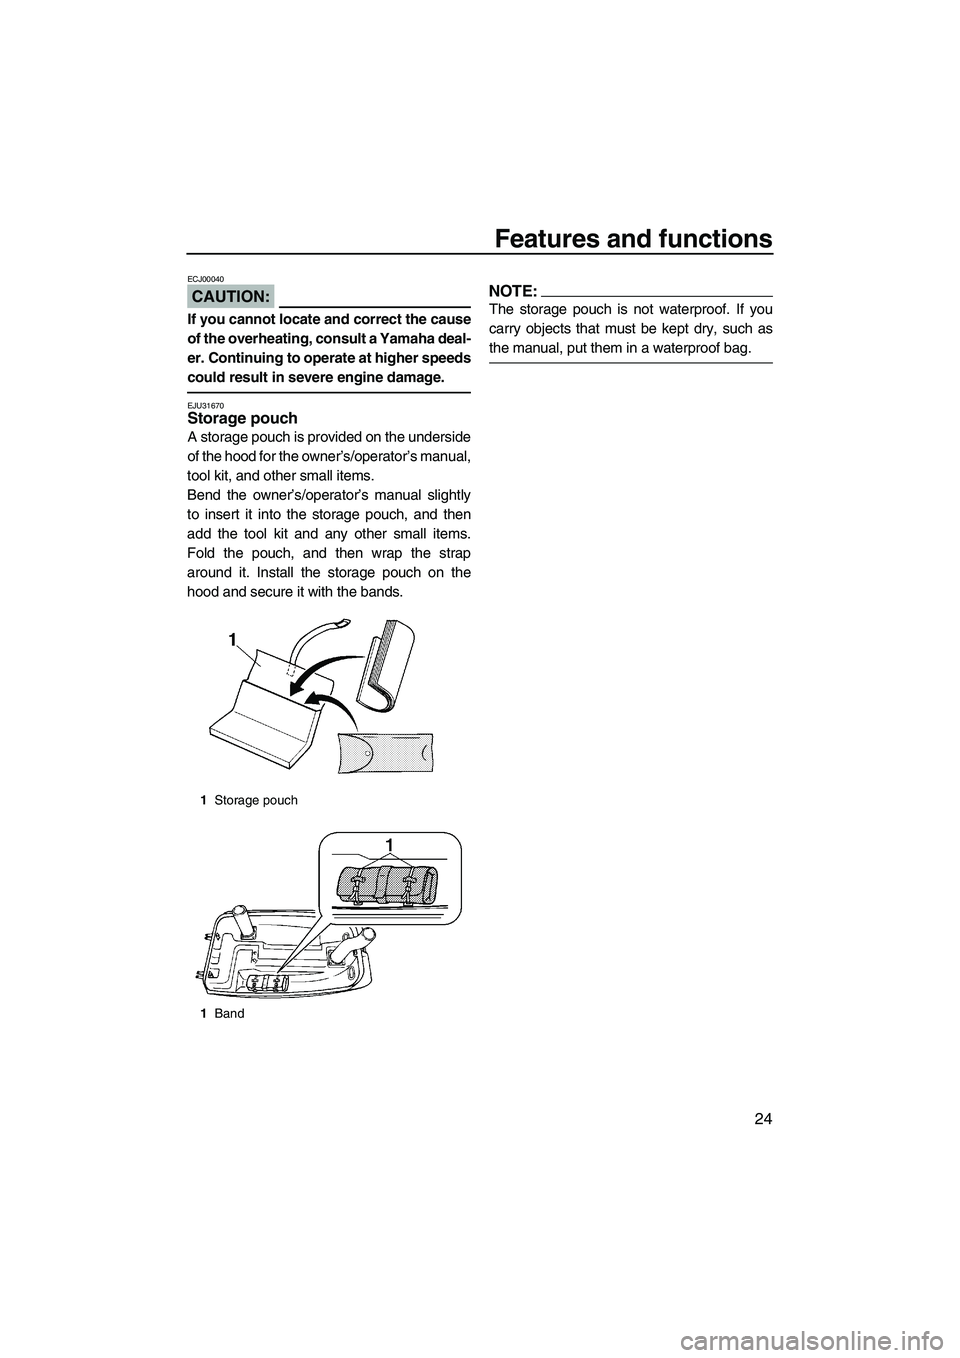 YAMAHA SUPERJET 2007  Owners Manual Features and functions
24
CAUTION:
ECJ00040
If you cannot locate and correct the cause
of the overheating, consult a Yamaha deal-
er. Continuing to operate at higher speeds
could result in severe engi